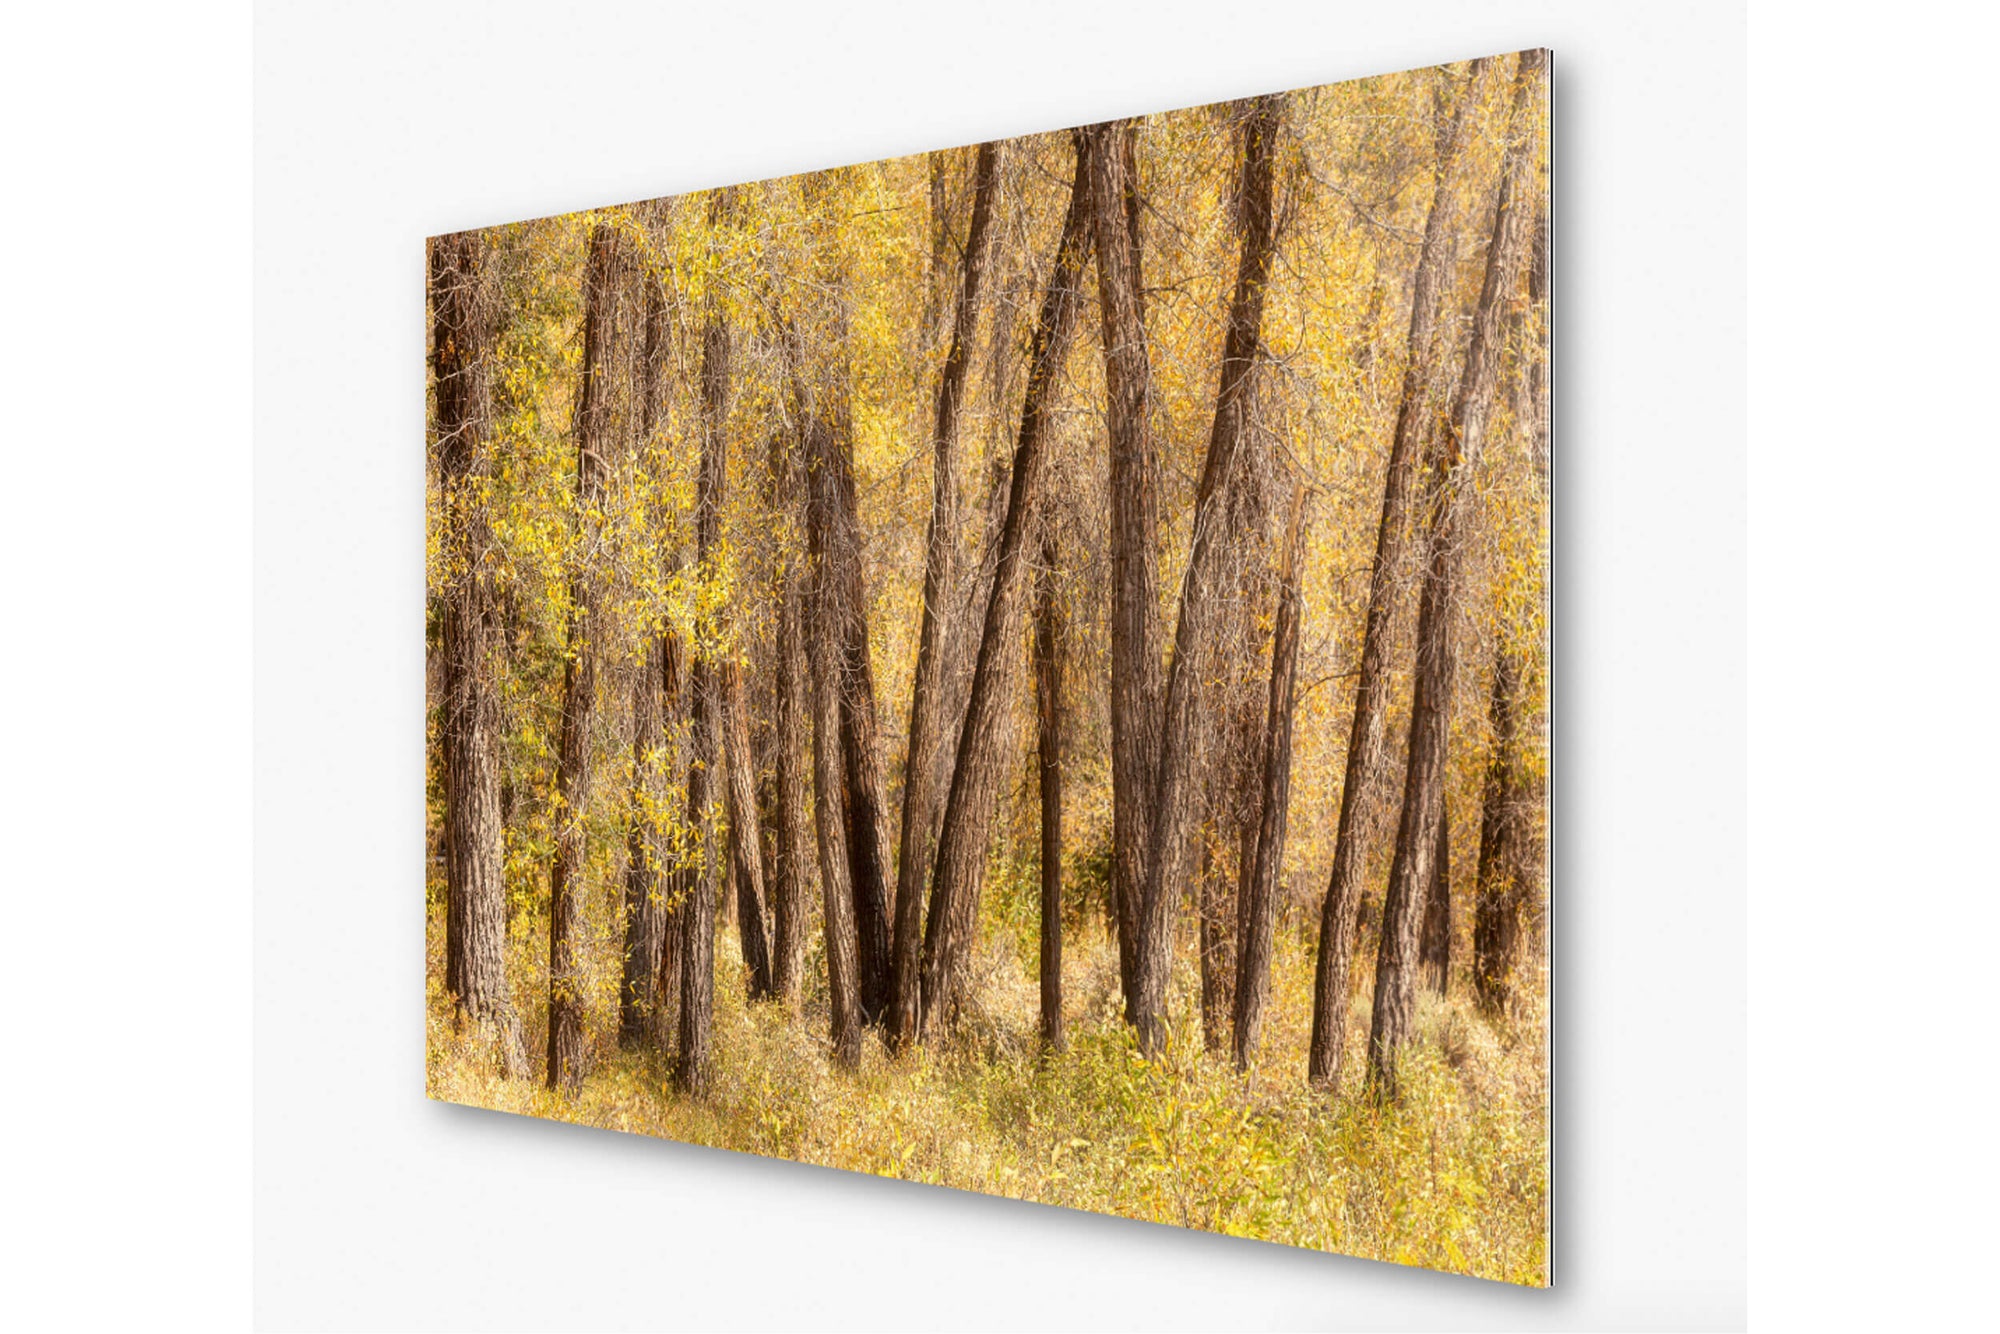 This piece of TruLife acrylic Jackson Hole art shows fall colors in Grand Teton National Park.